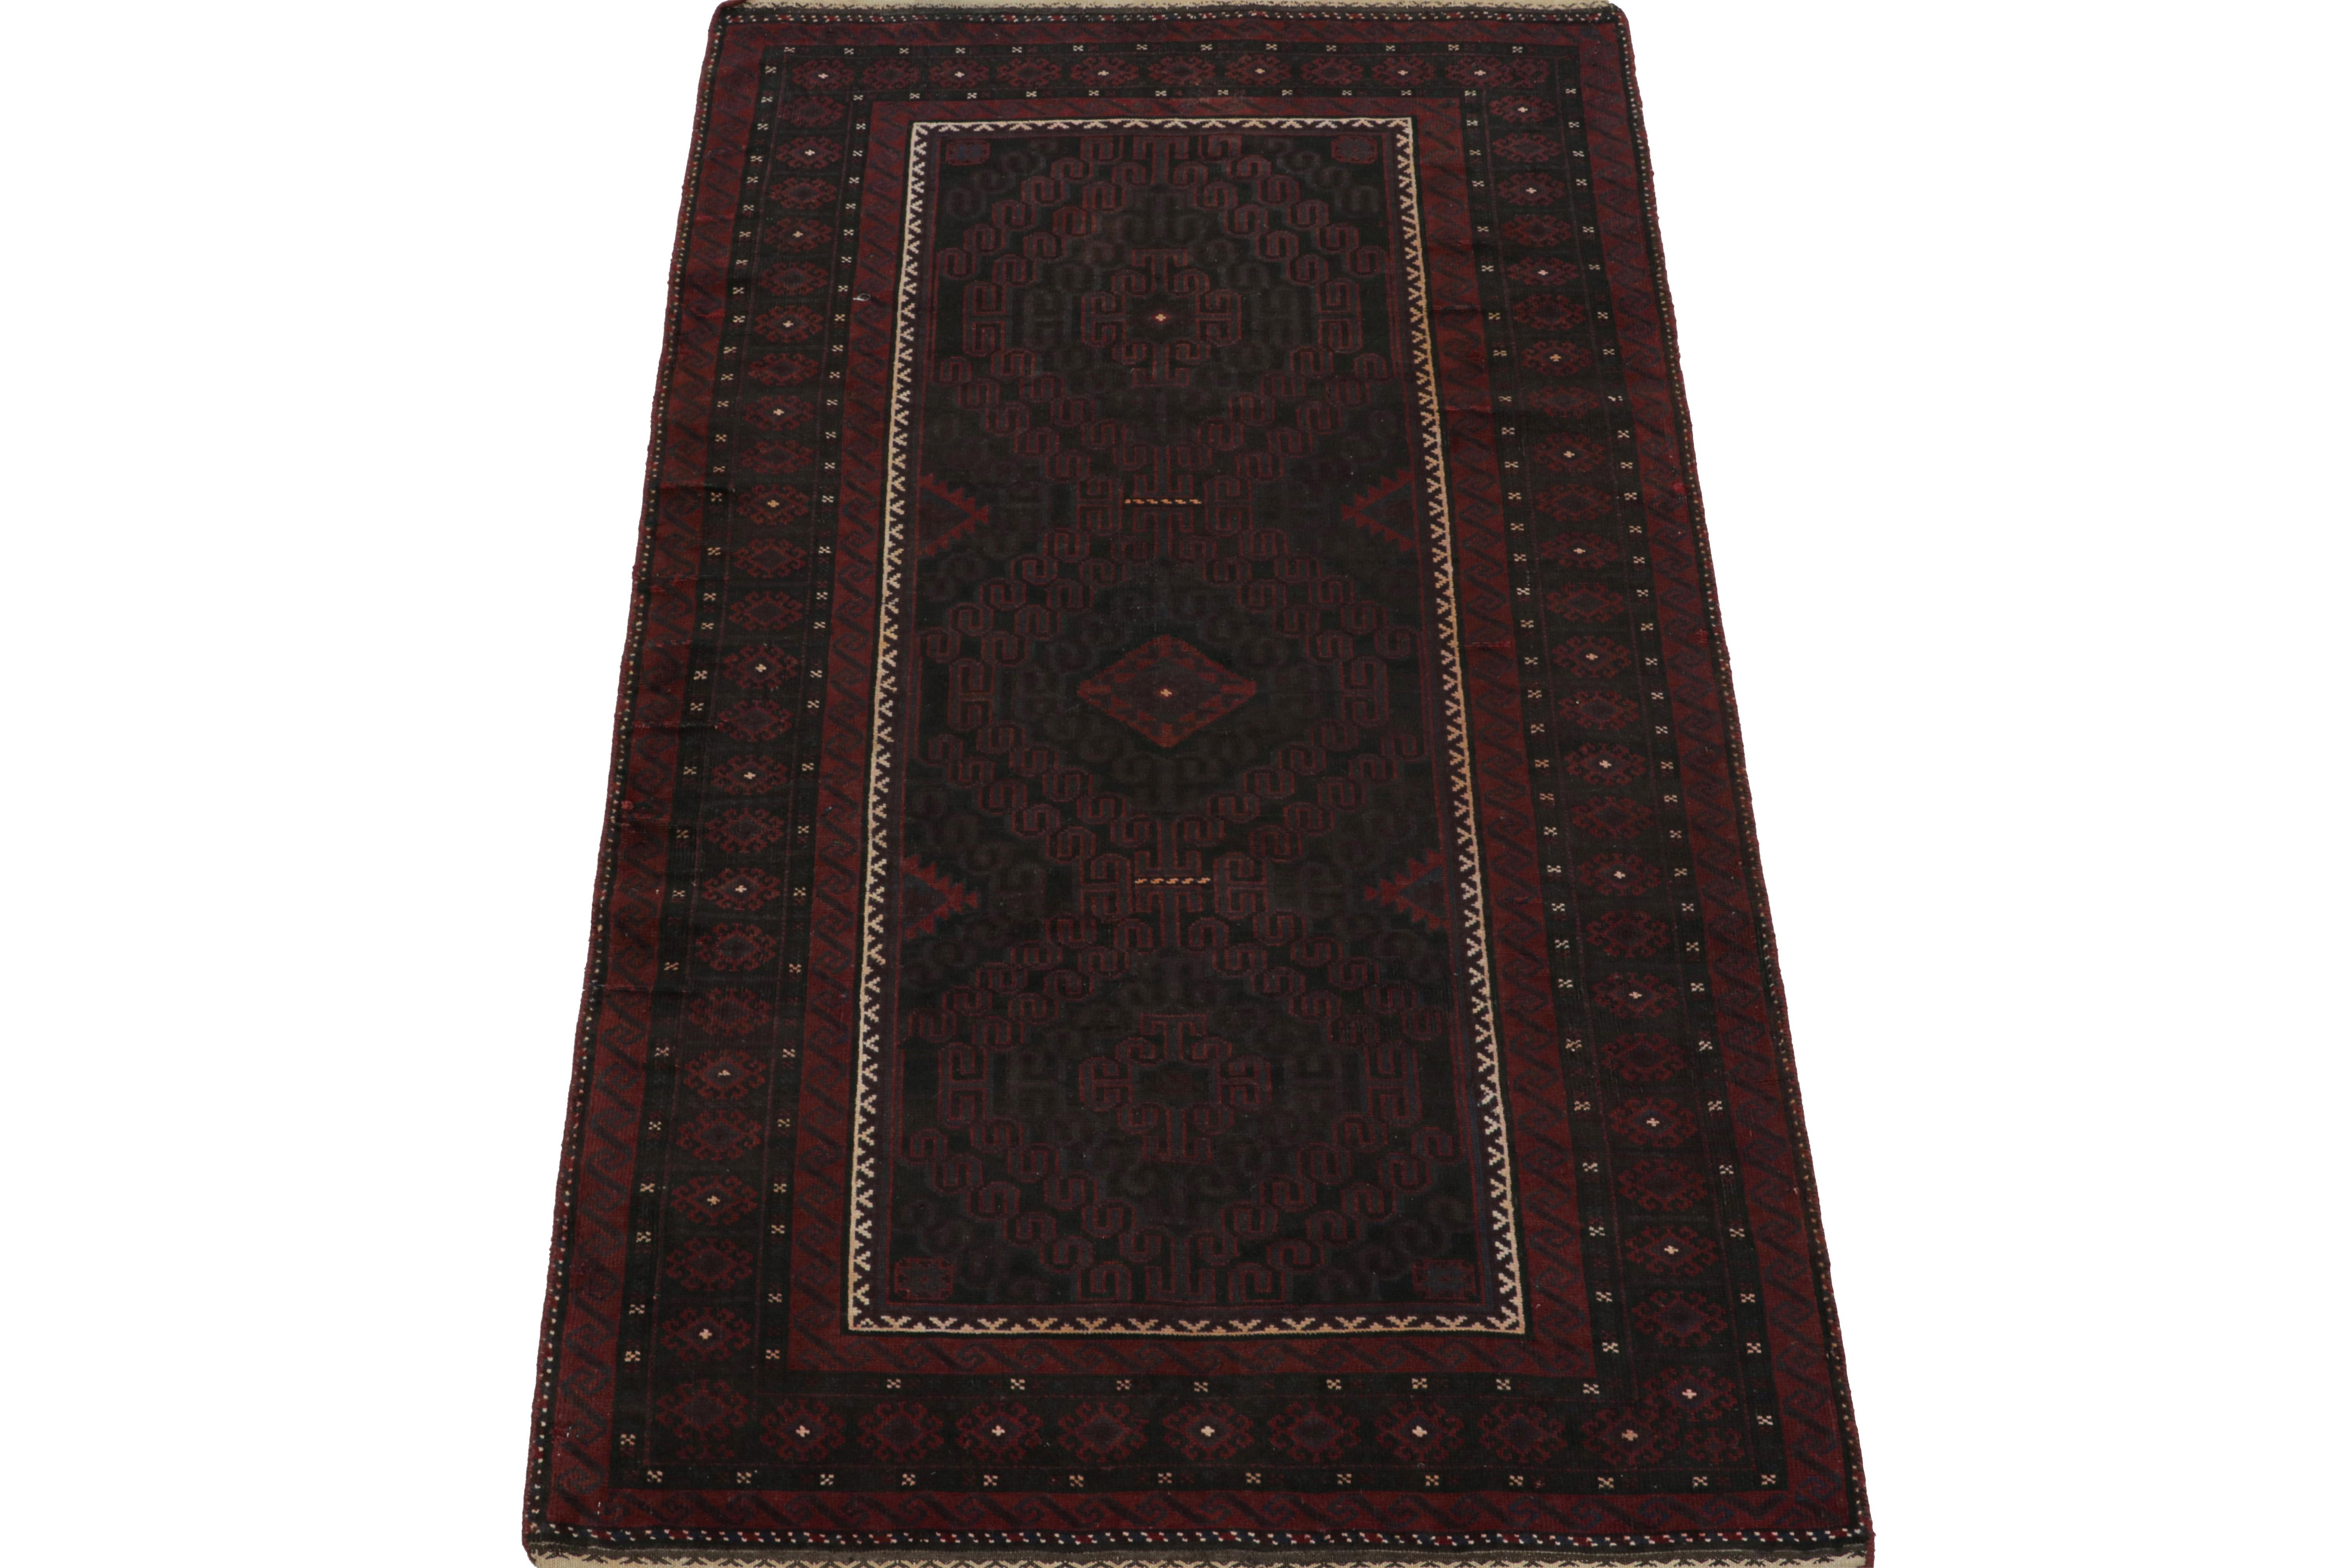 Tribal Vintage Baluch Runner Rug in Maroon & Blue Geometric Patterns, from Rug & Kilim For Sale